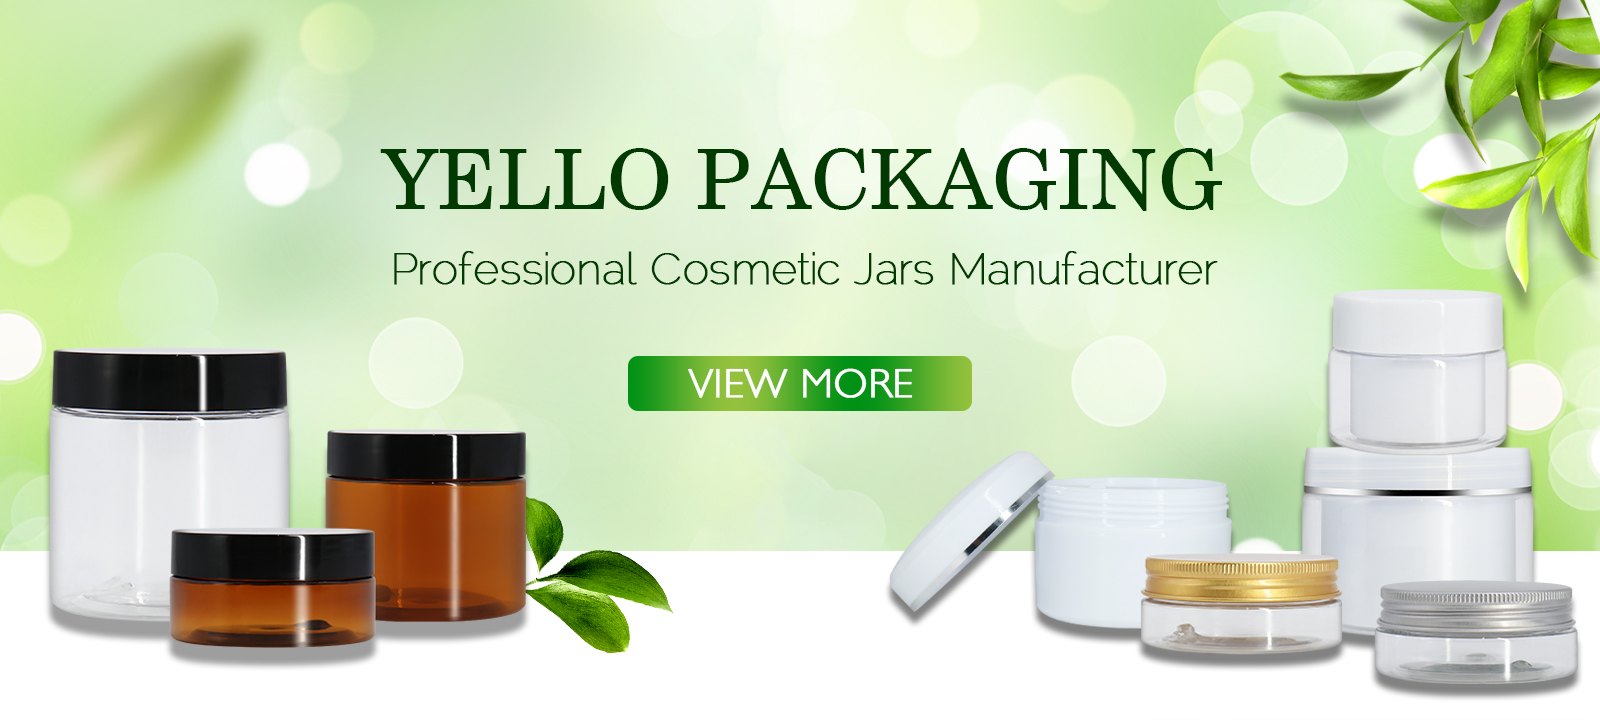 PET cosmetic cream jars from Yello Packaging